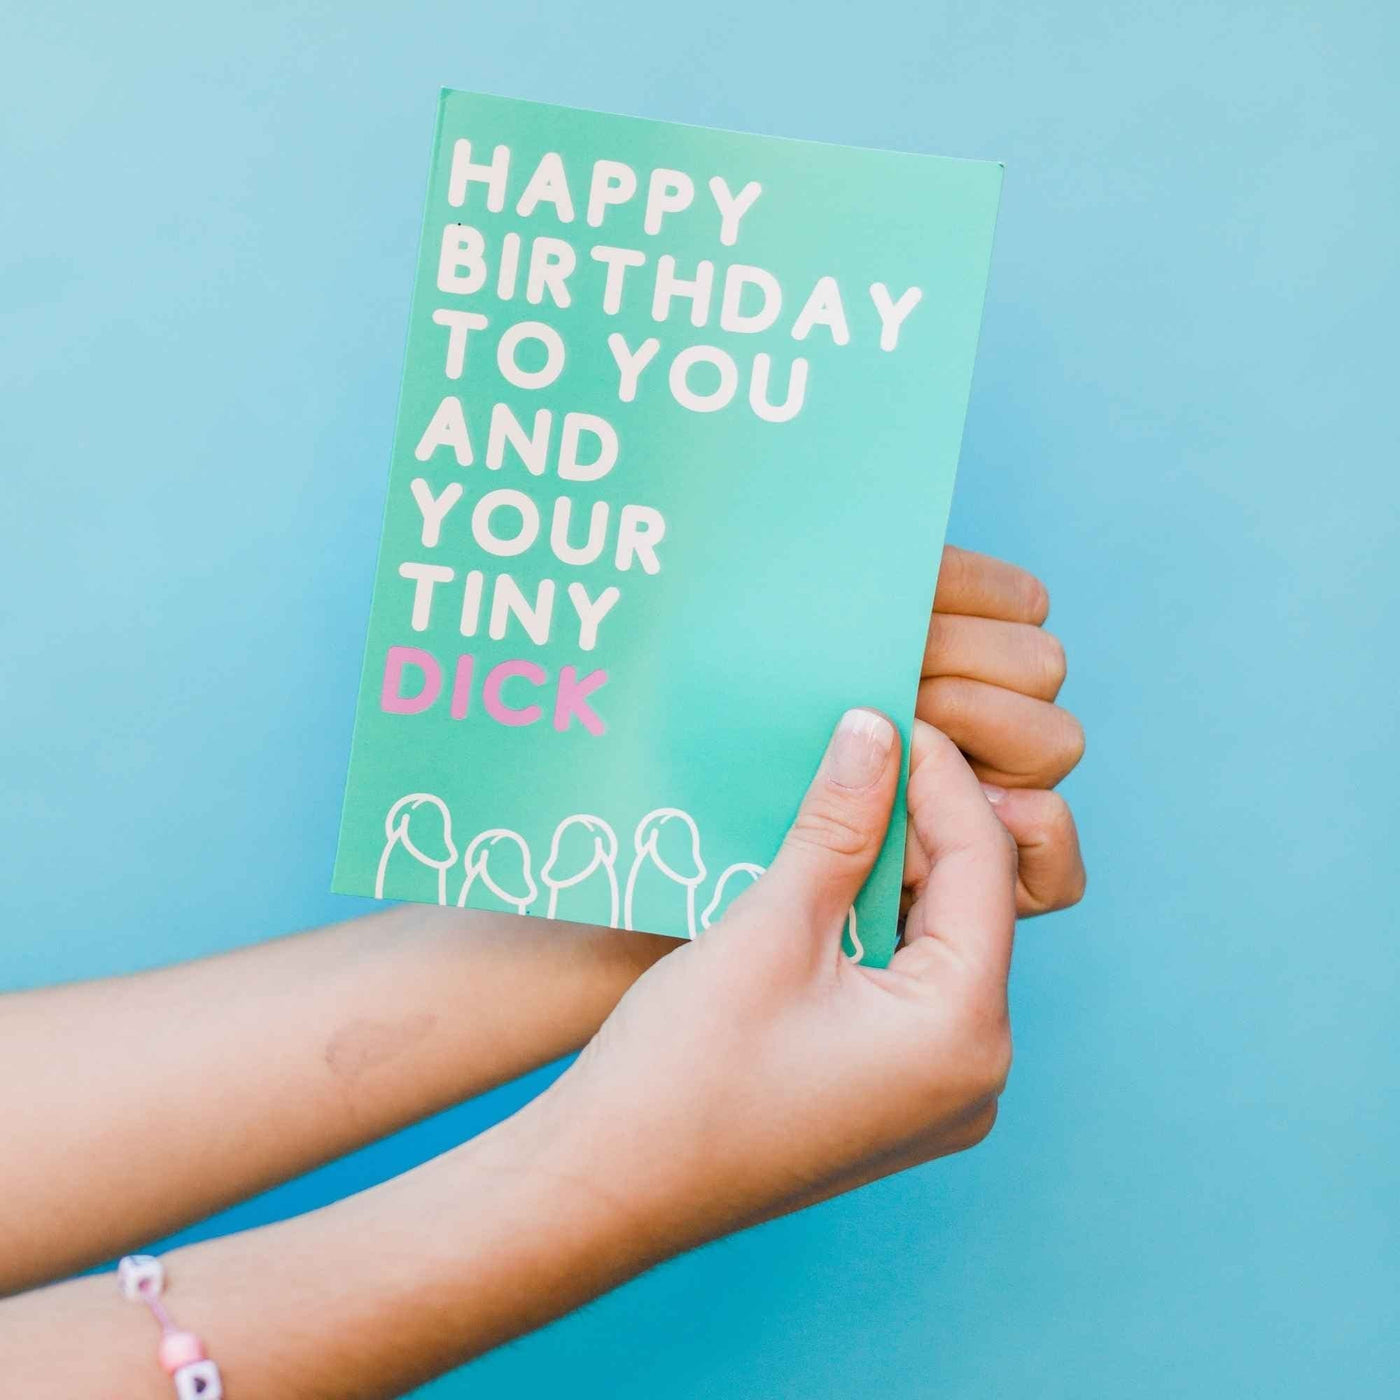 Happy Birthday to You and Your Tiny Penis (NSFW) - Glitter Bomb Card by DickAtYourDoor